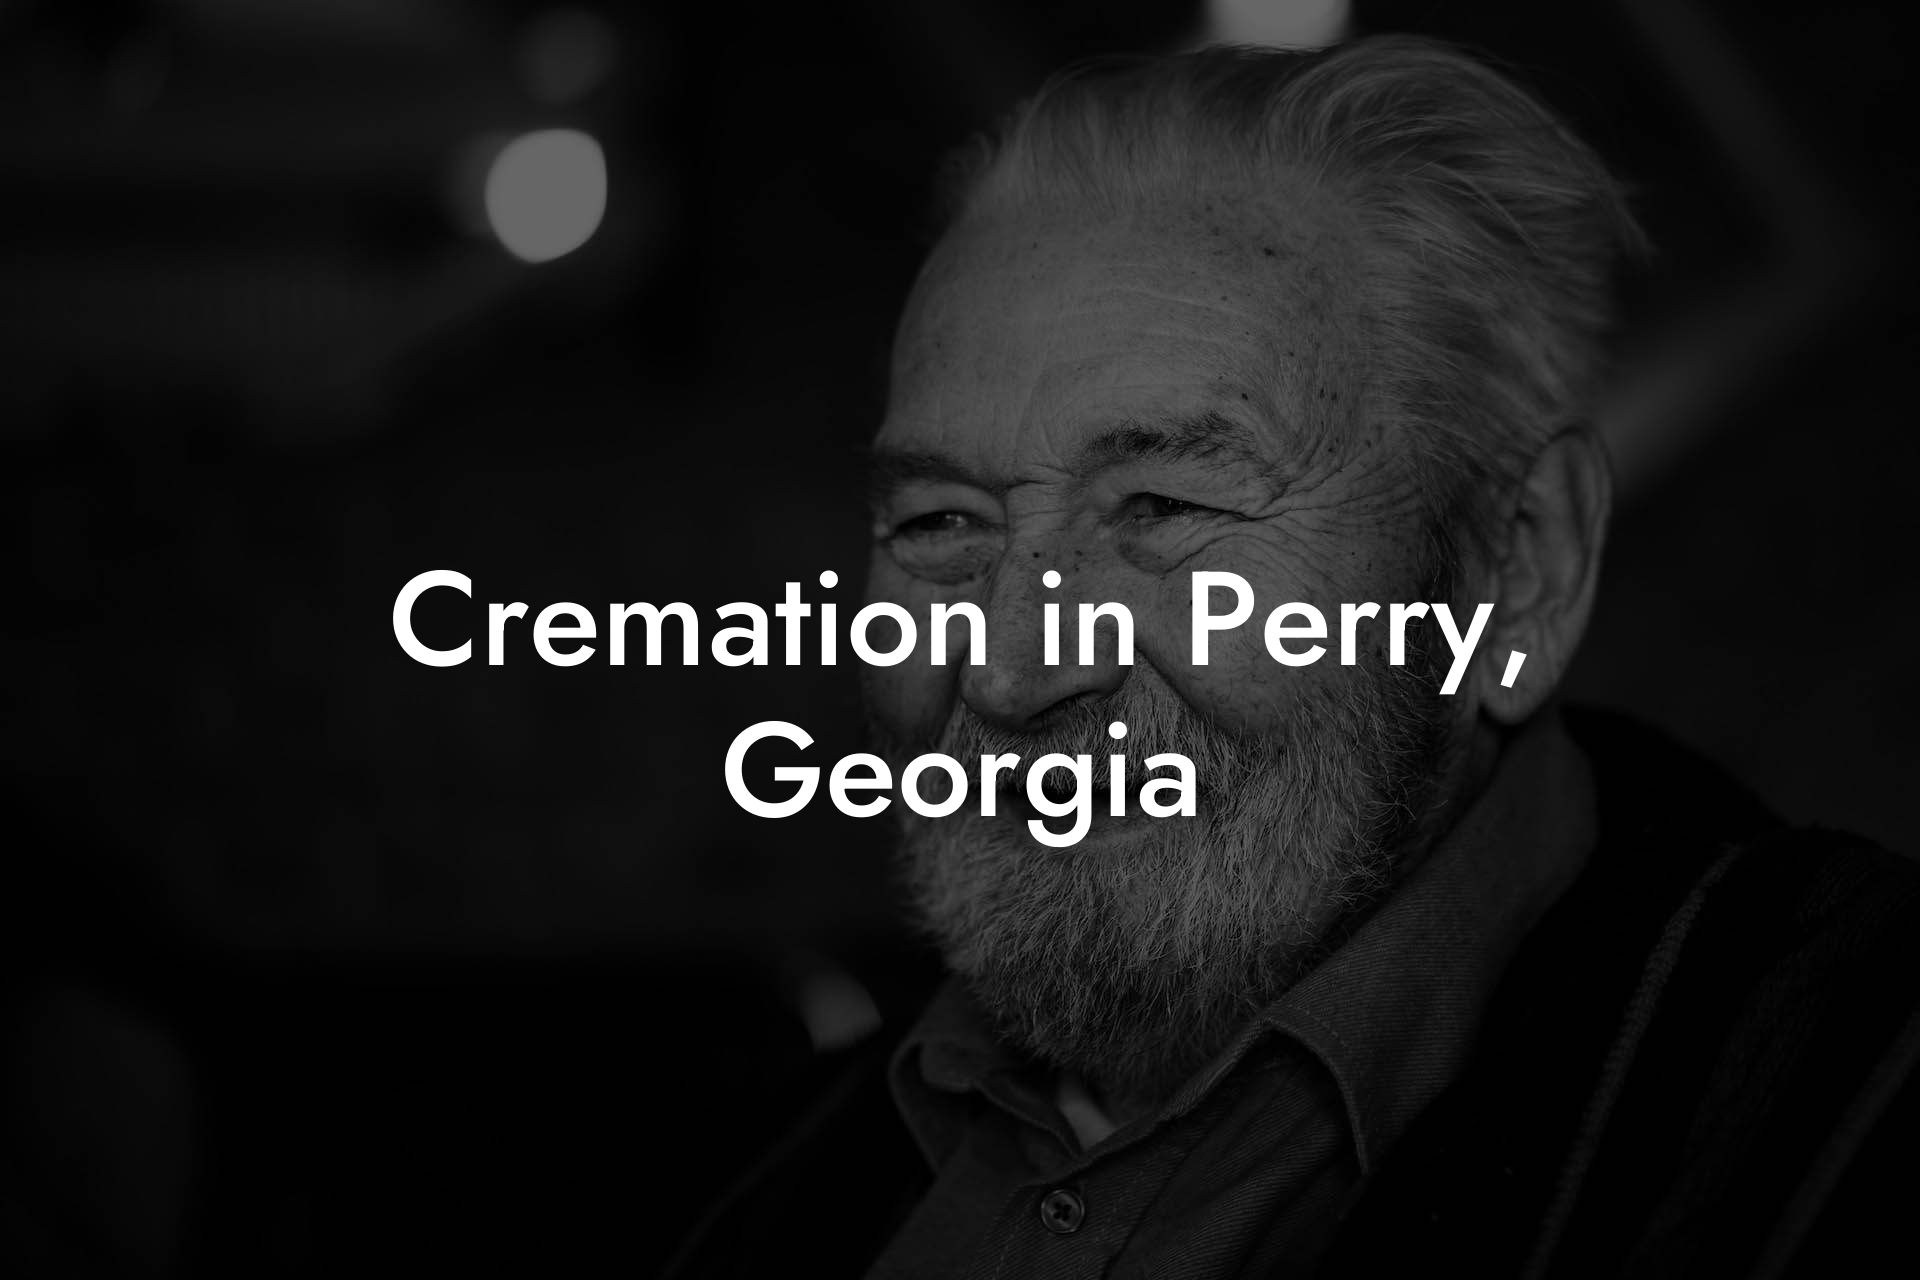 Cremation in Perry, Georgia